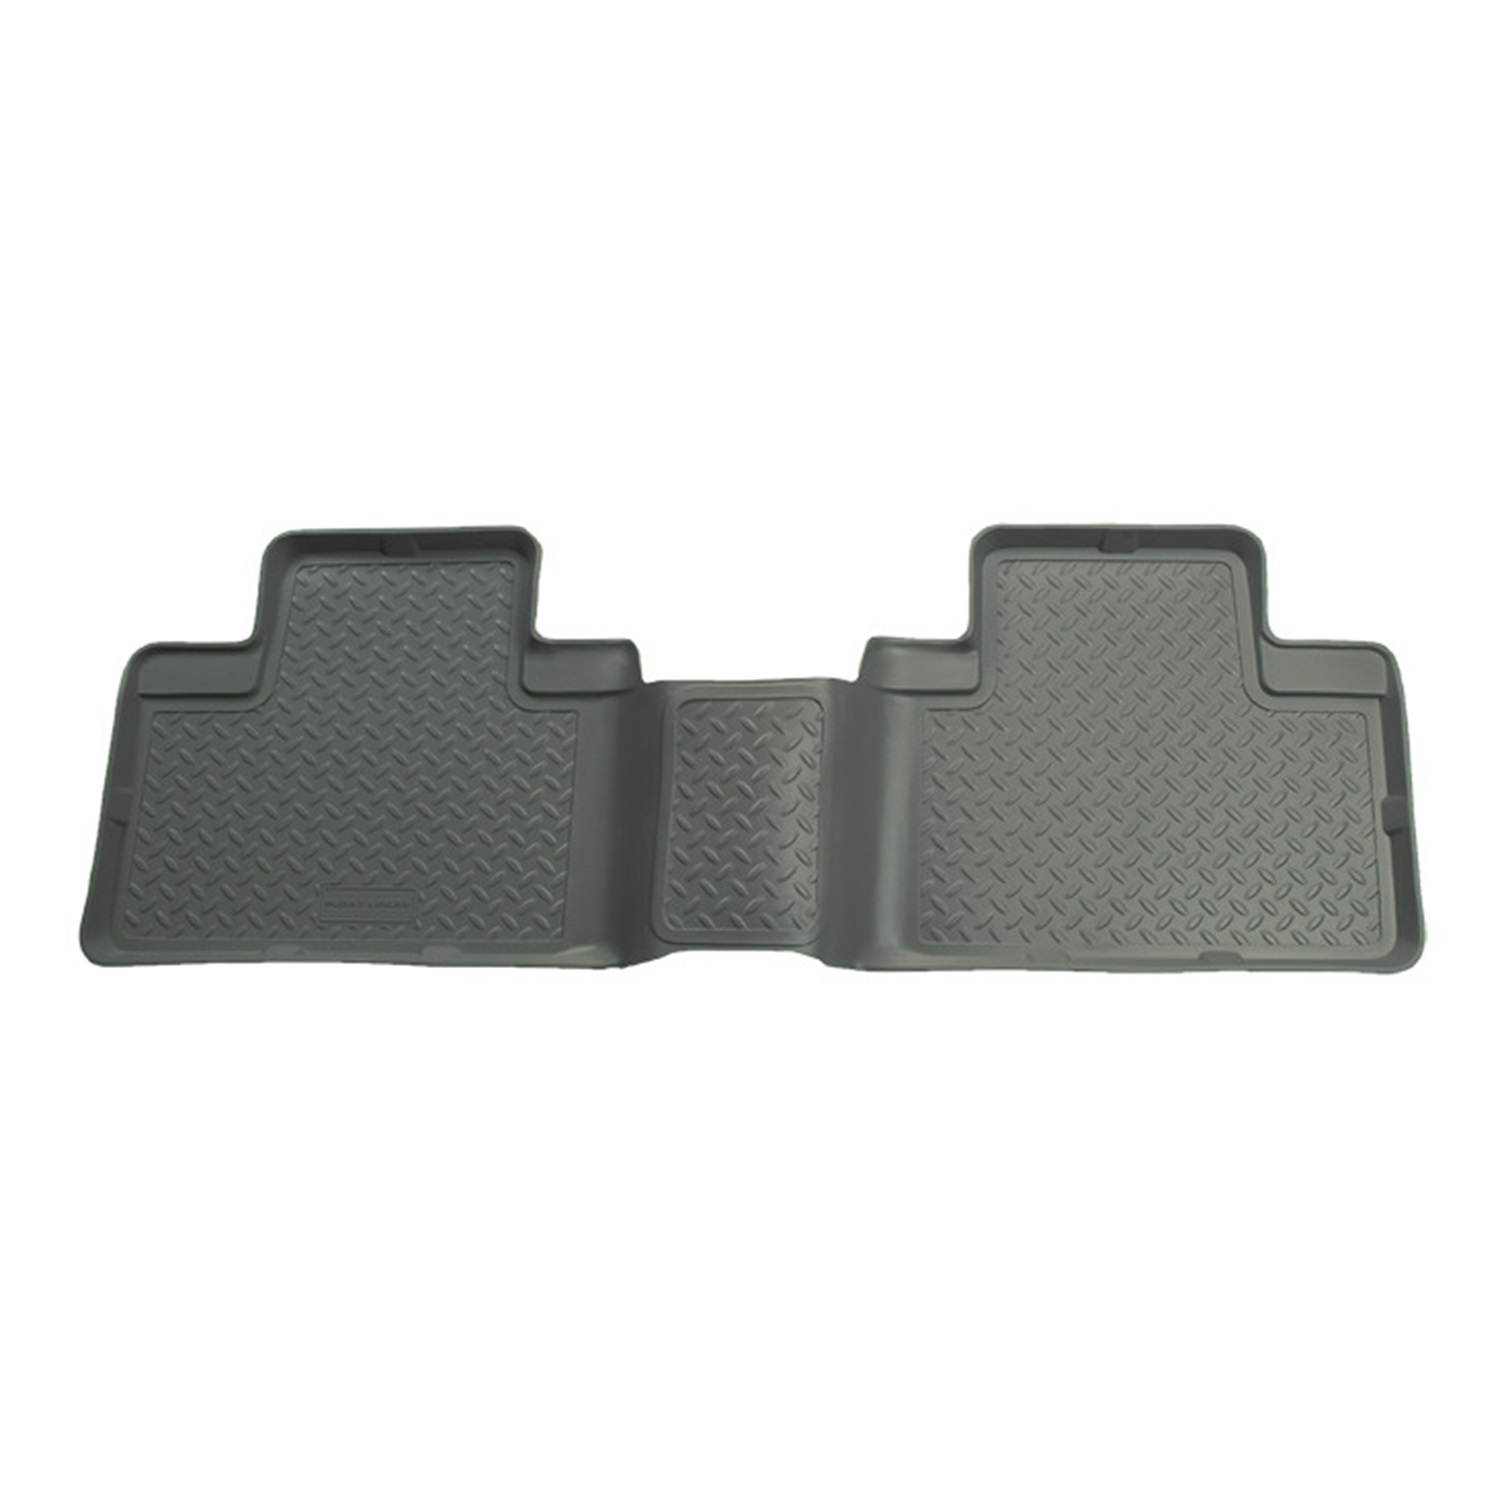 Husky Liners Husky Liners 65102 Classic Style; Floor Liner 95-04 Tacoma